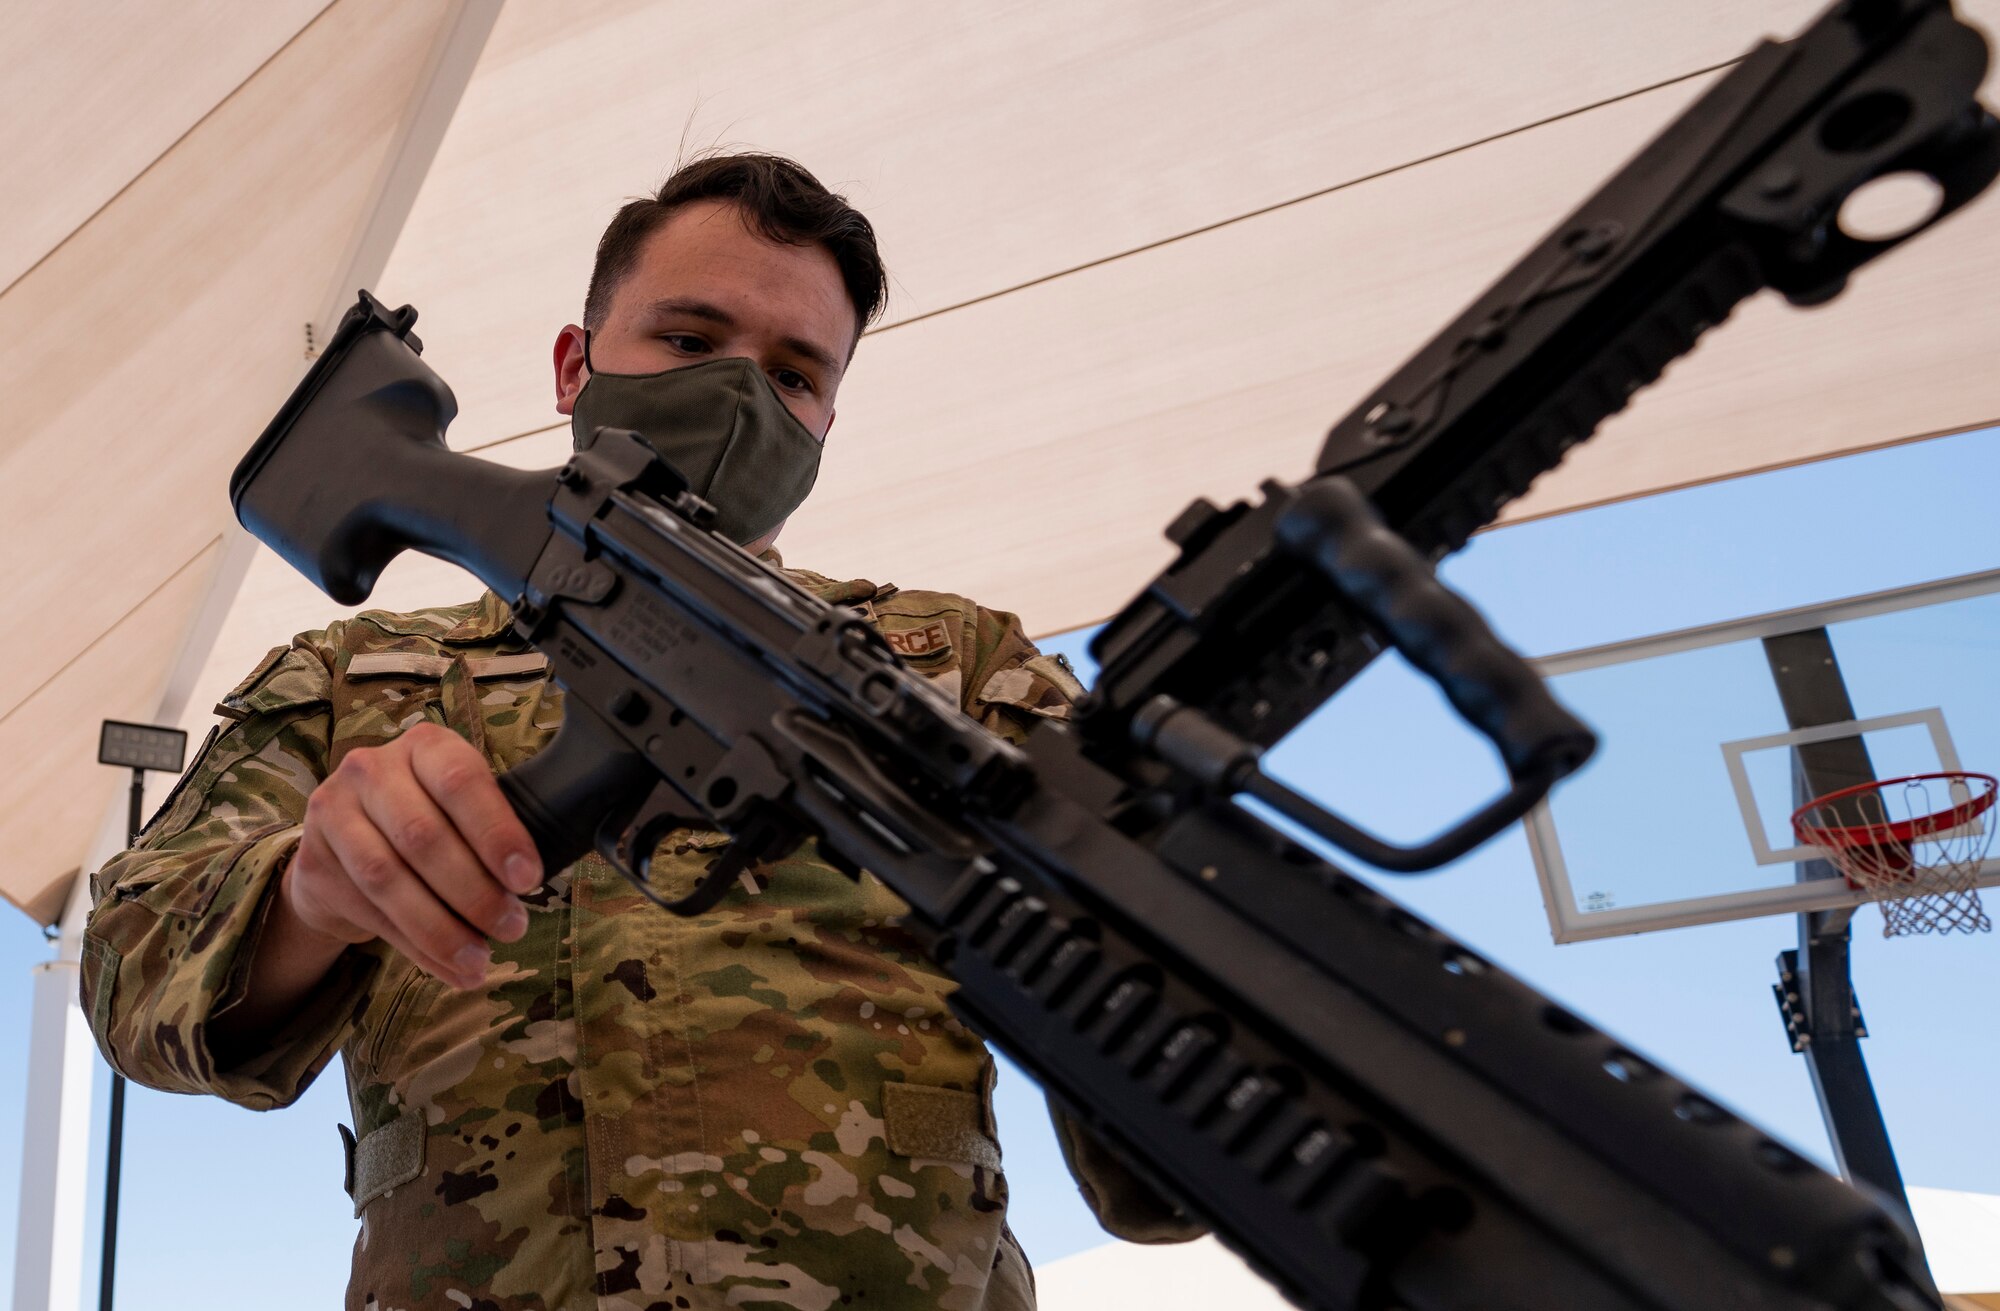 Airman inspects the barrel of a weapon.